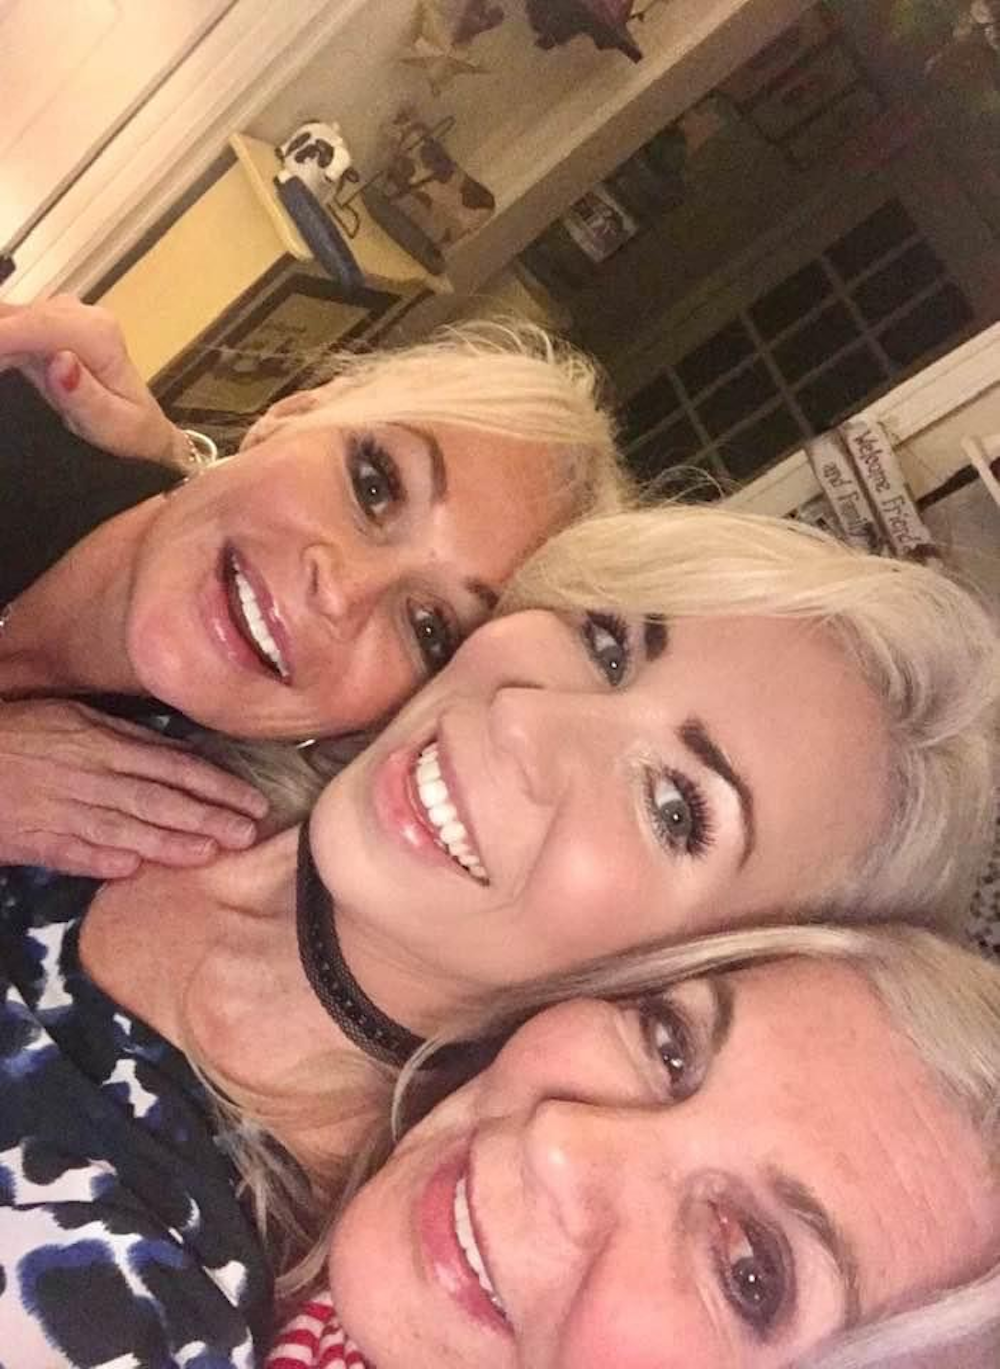 Sisters Yvette and Janice with their mama Maggie , fun night out 🥂hope they didn’t  get in to much trouble !! 🤣